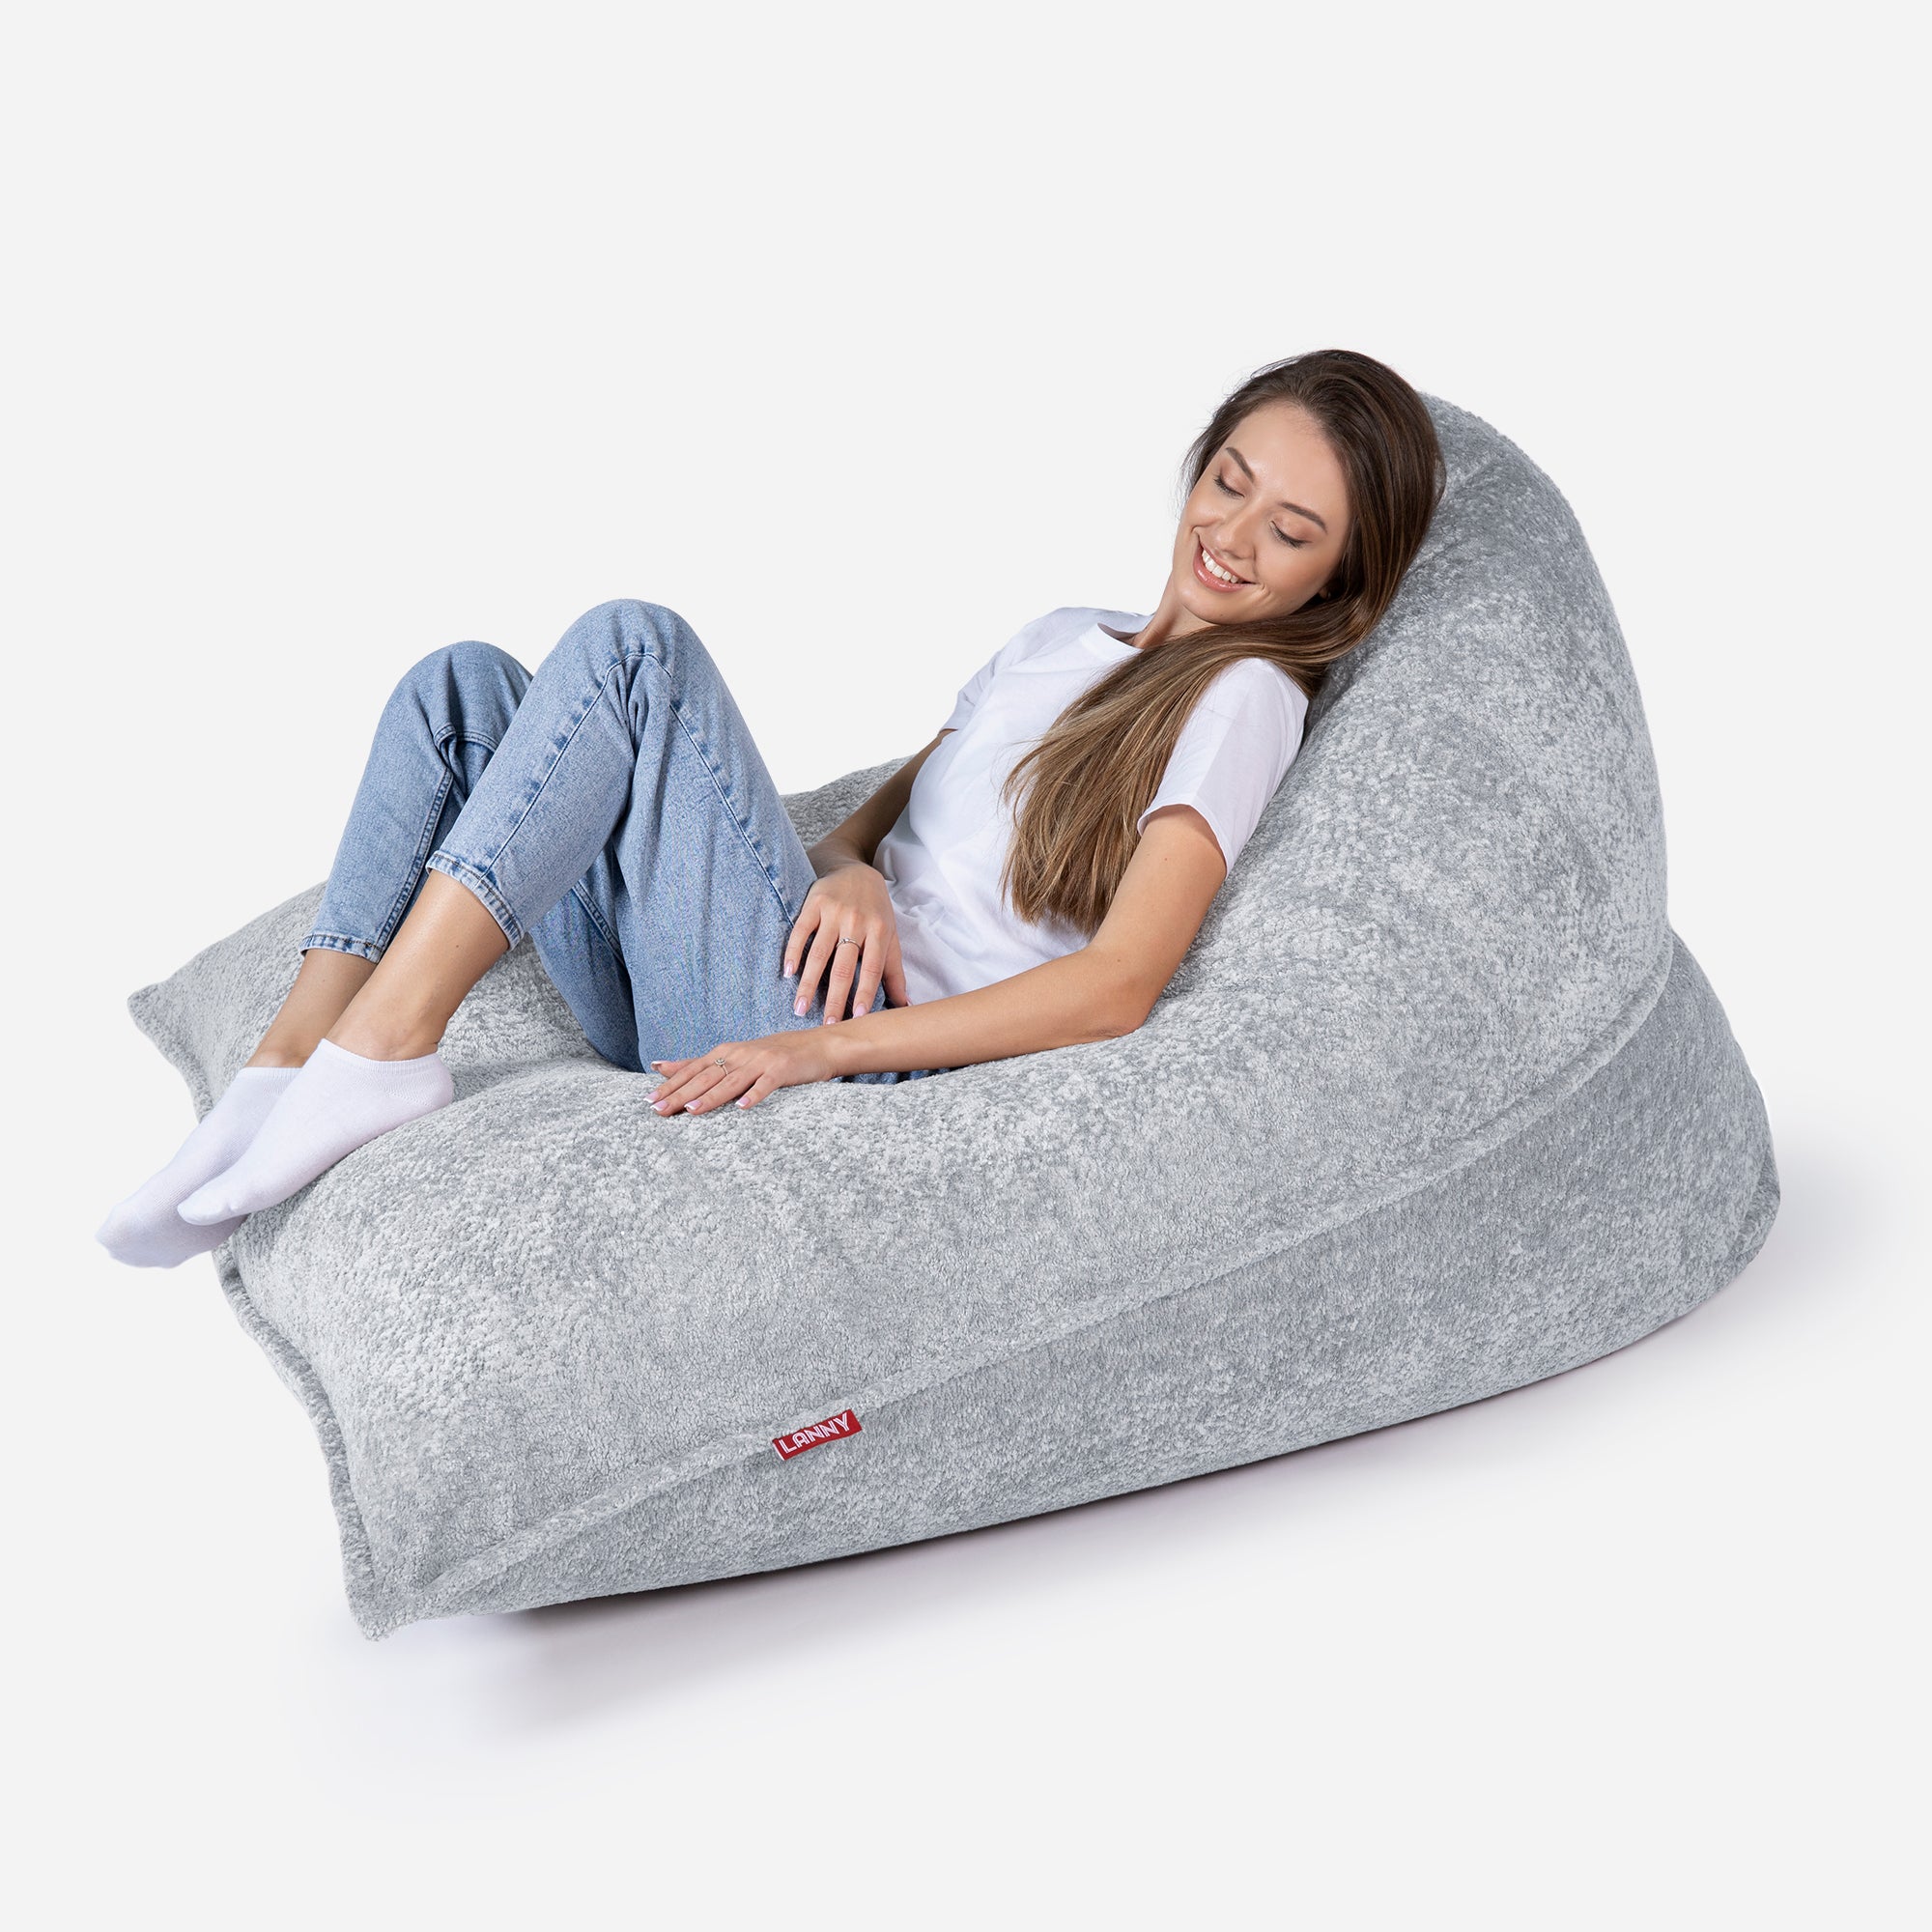 Beanbag Sloppy design fluffy fabric Gray color  with girl seating on it 